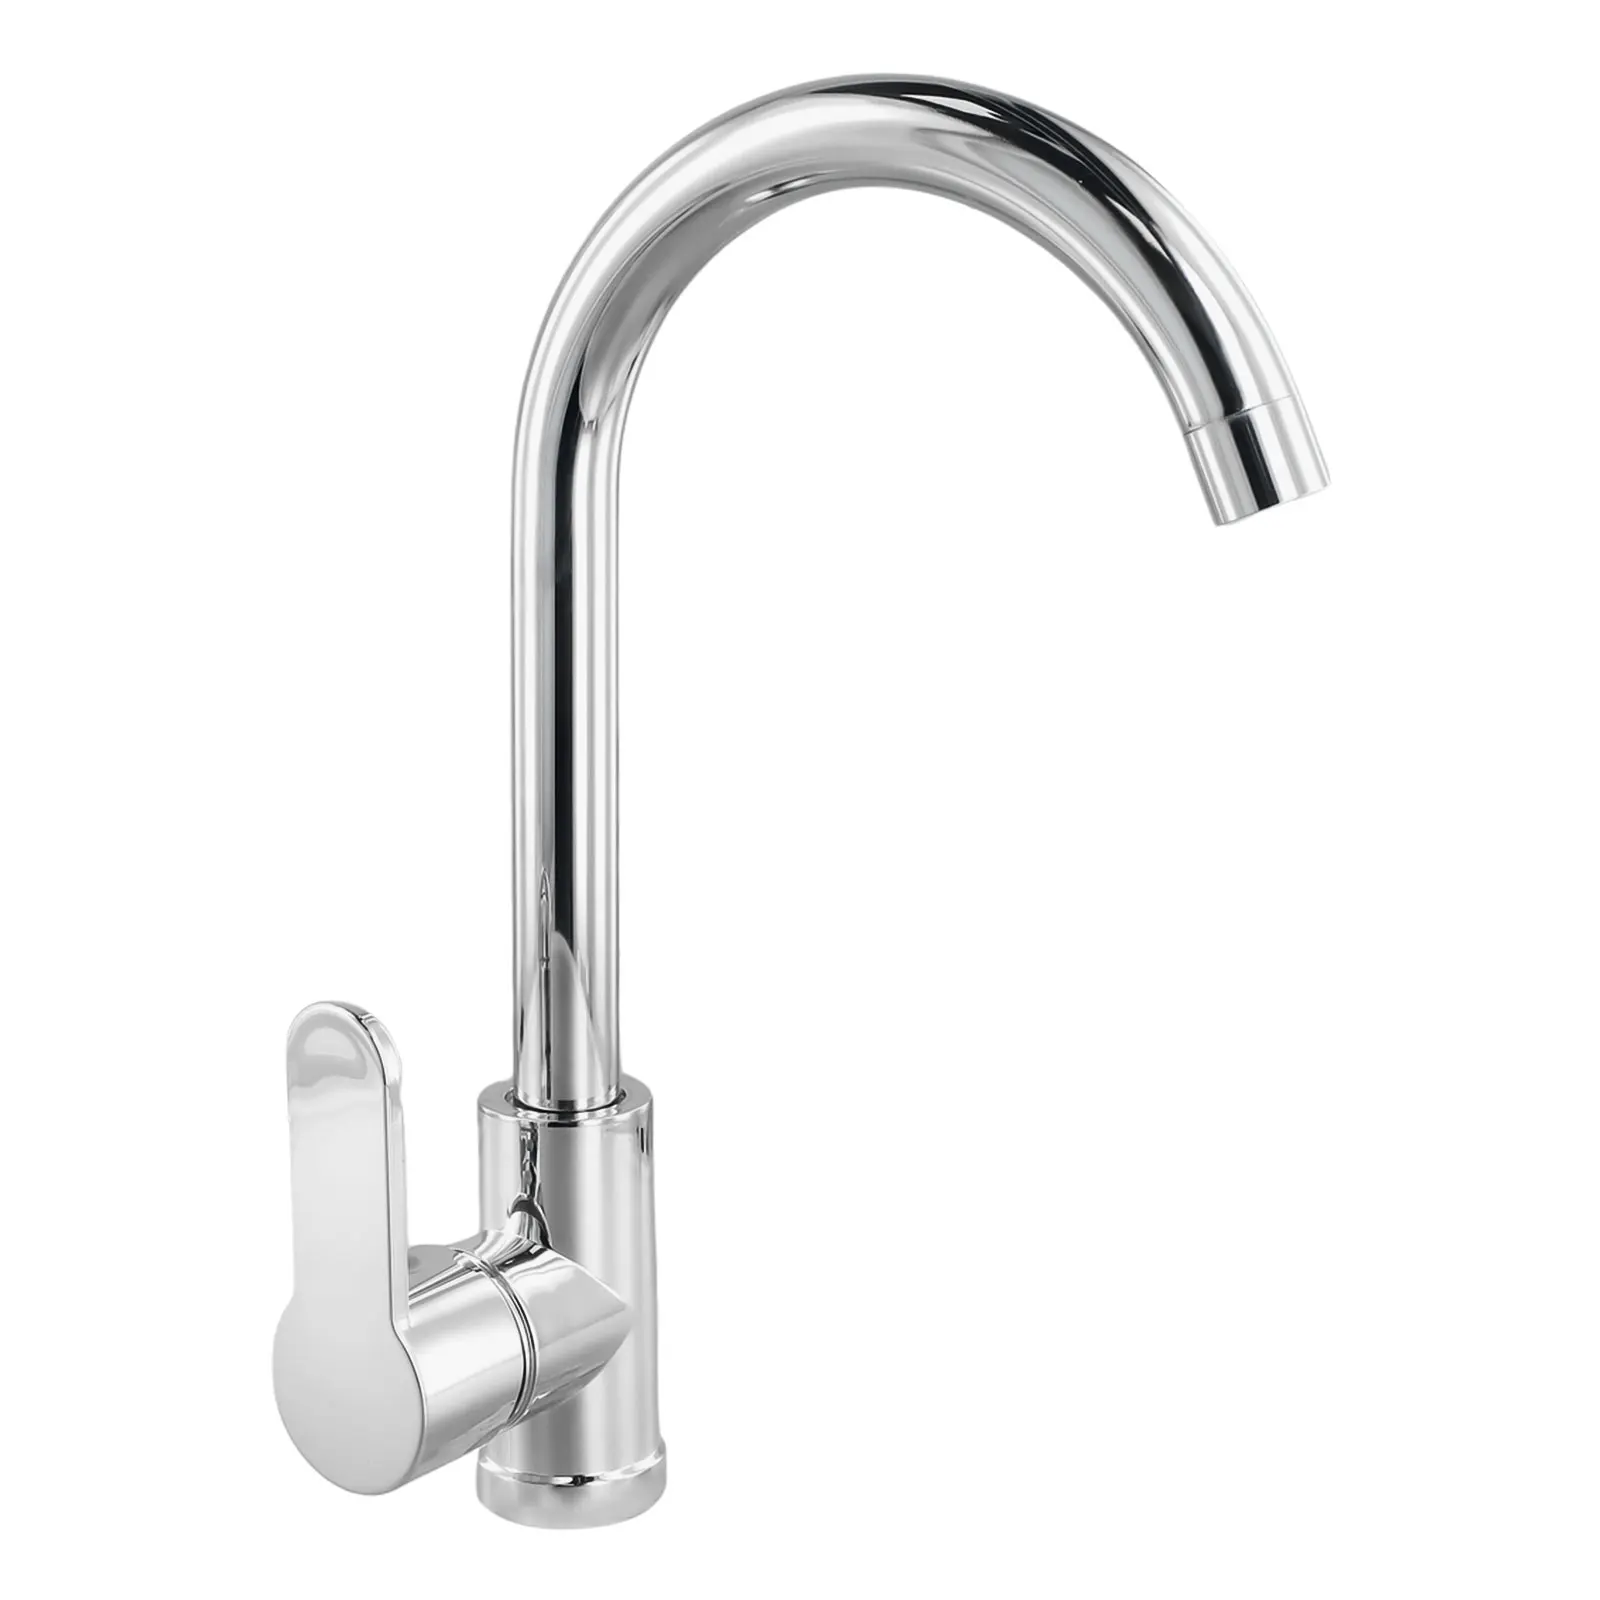 Stainless Steel Kitchen Faucet Polished Chrome Plated Swivel Basin Sink Cold Hot Easy To Operate Mixer Tap kitchen faucet brush gold lead free stainless steel pull out hot and cold single lever kitchen sink mixer